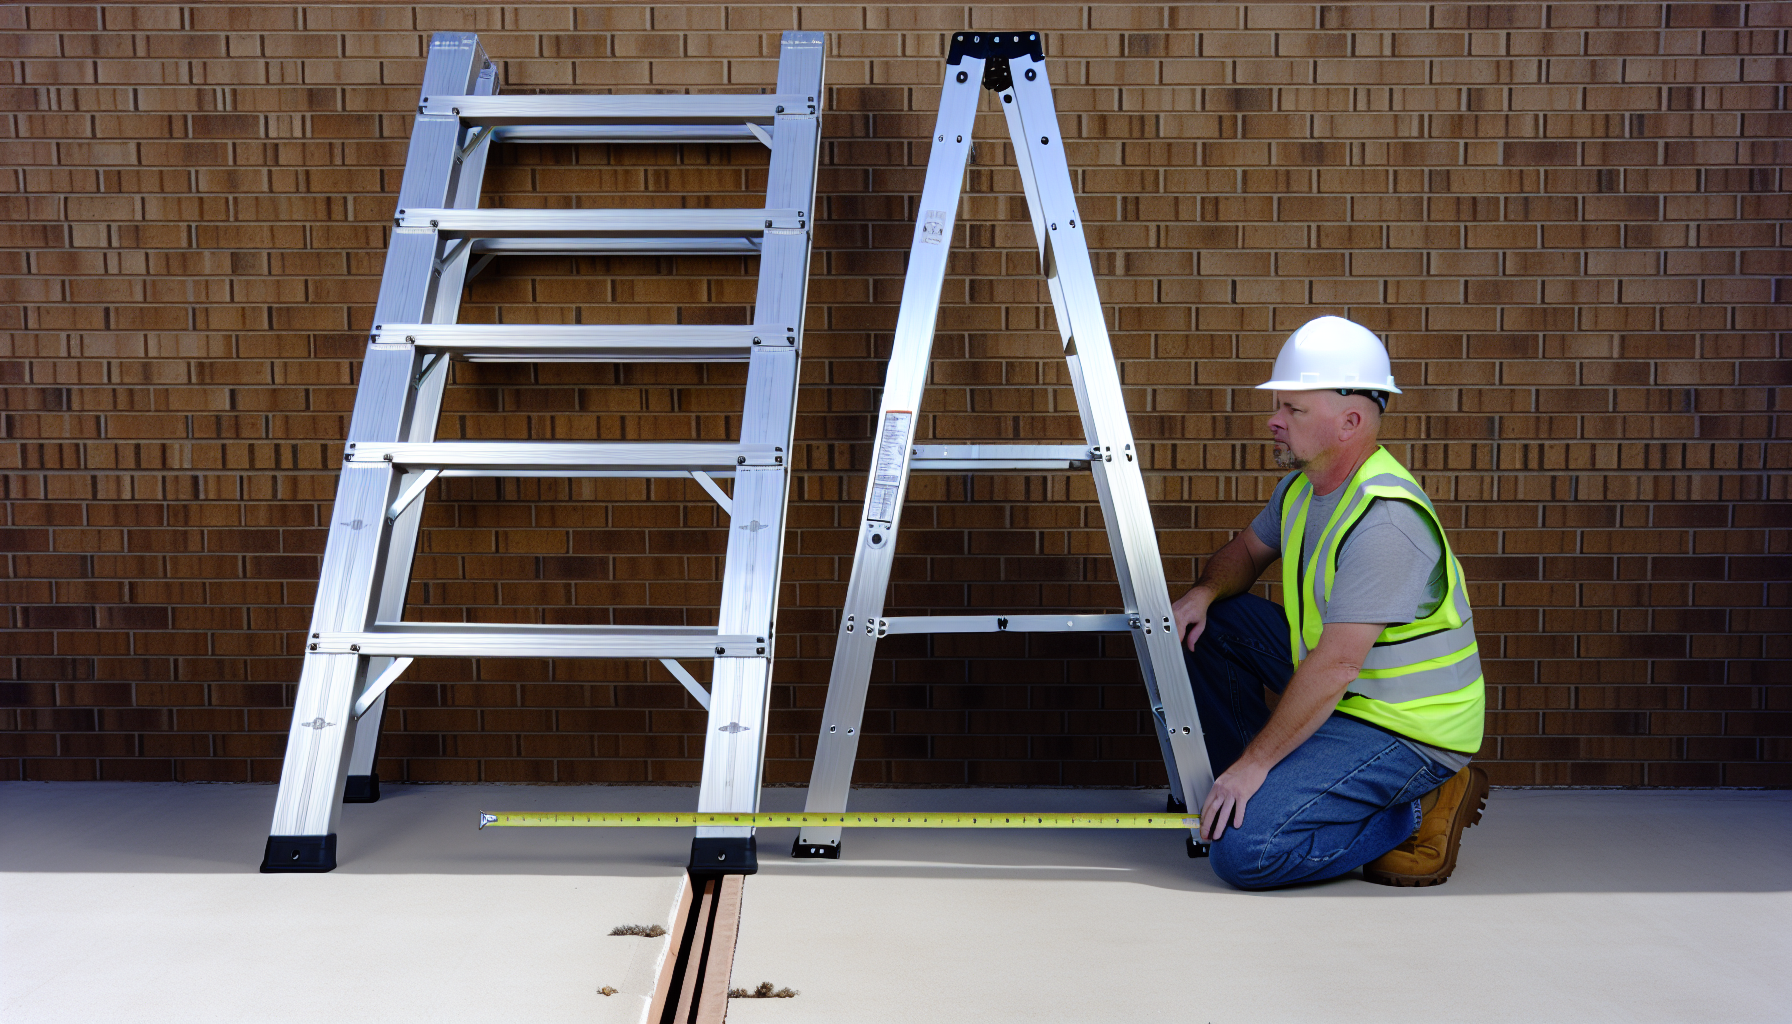 Ladder placement on a level surface